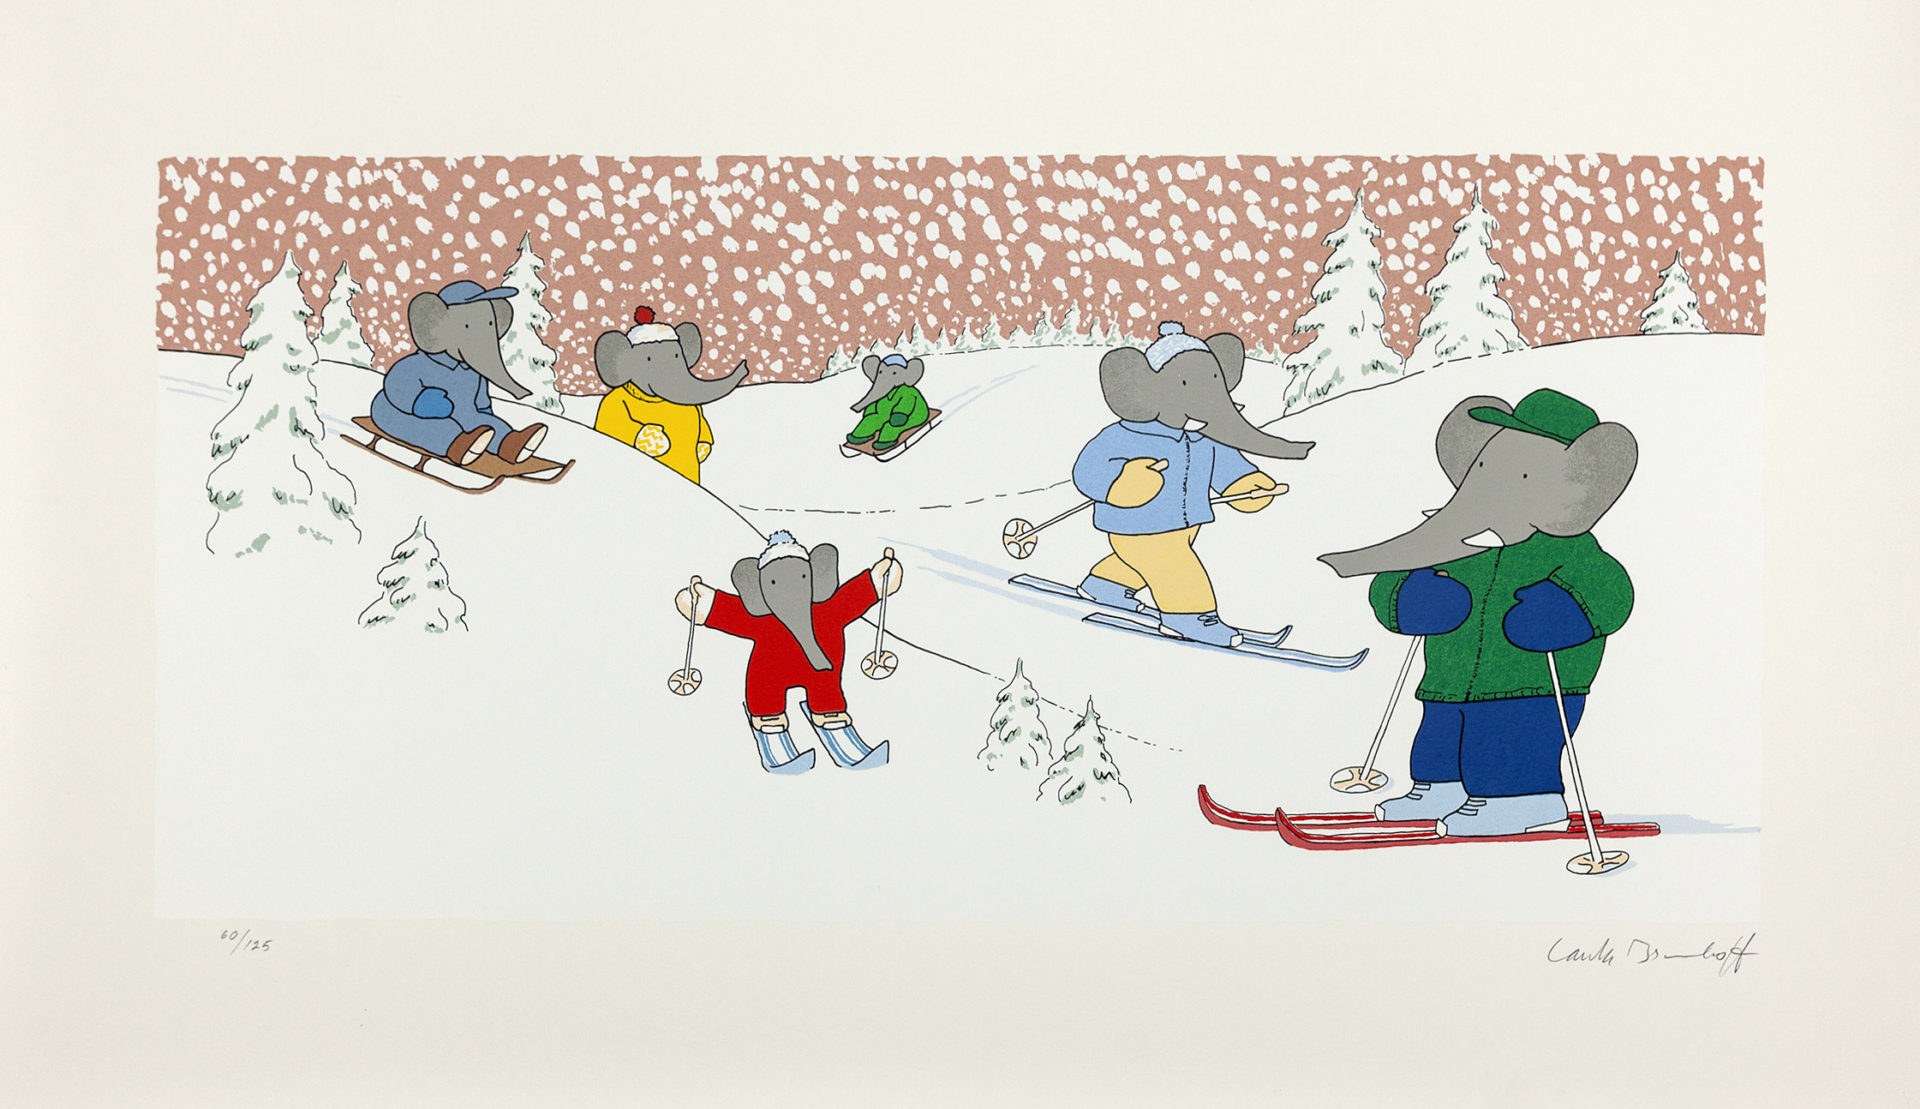 What Could Be Better Than Skiing in Winter?, 2006, Silkscreen, 16 1/2 x 28 1/4 inches (41.9 x 71.8 cm), Edition of 125